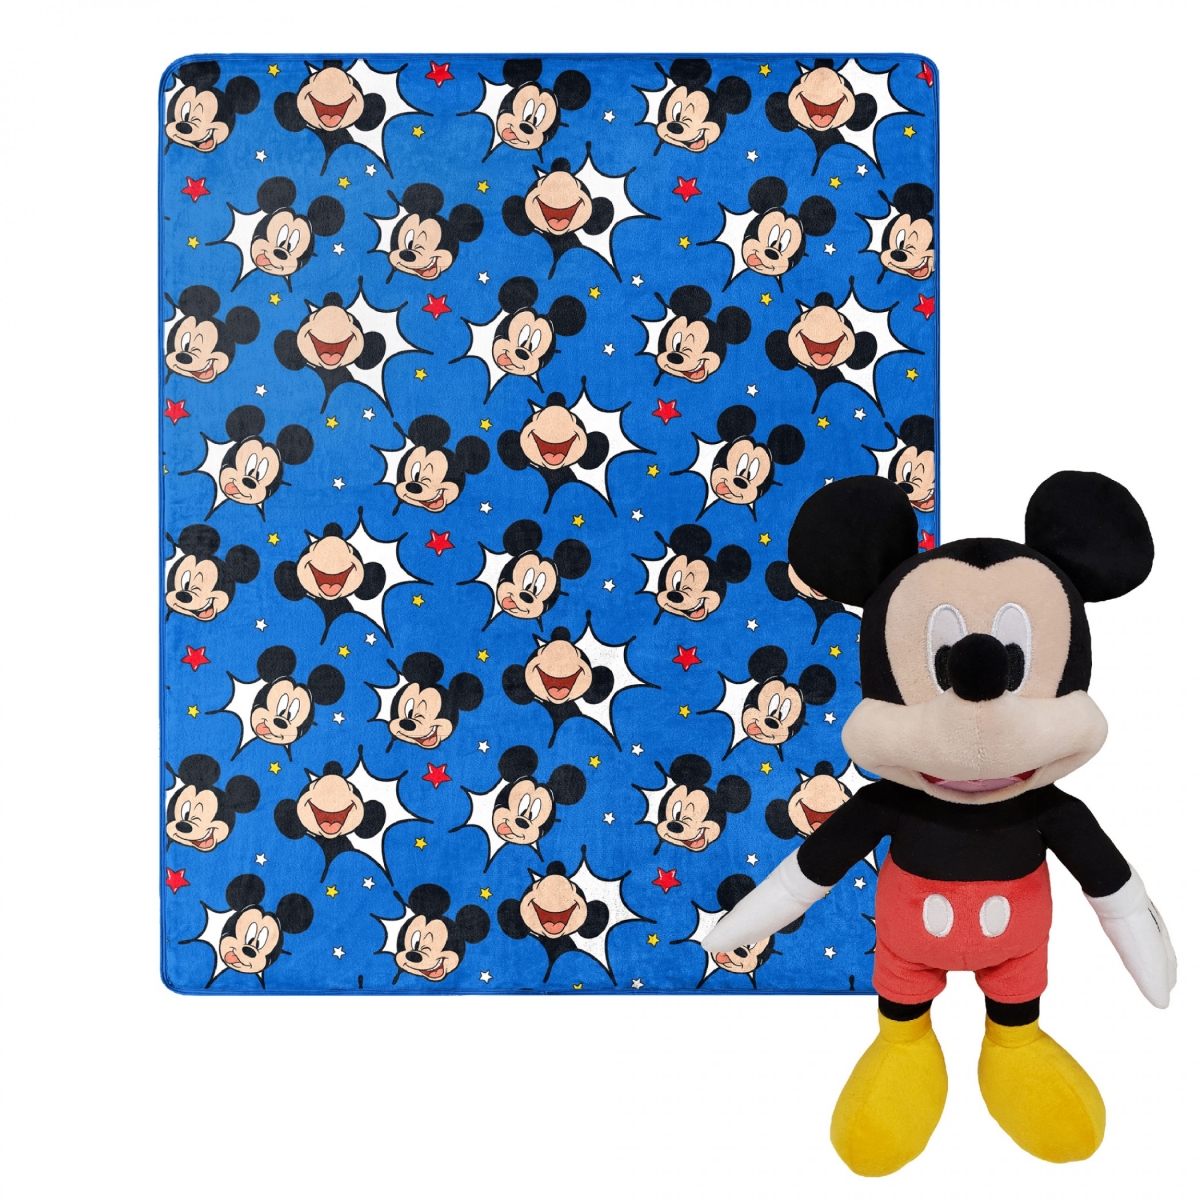 Picture of Disney 823752 40 x 50 in. Disney Mickey Mouse Faces Silk Touch with Plush Hugger